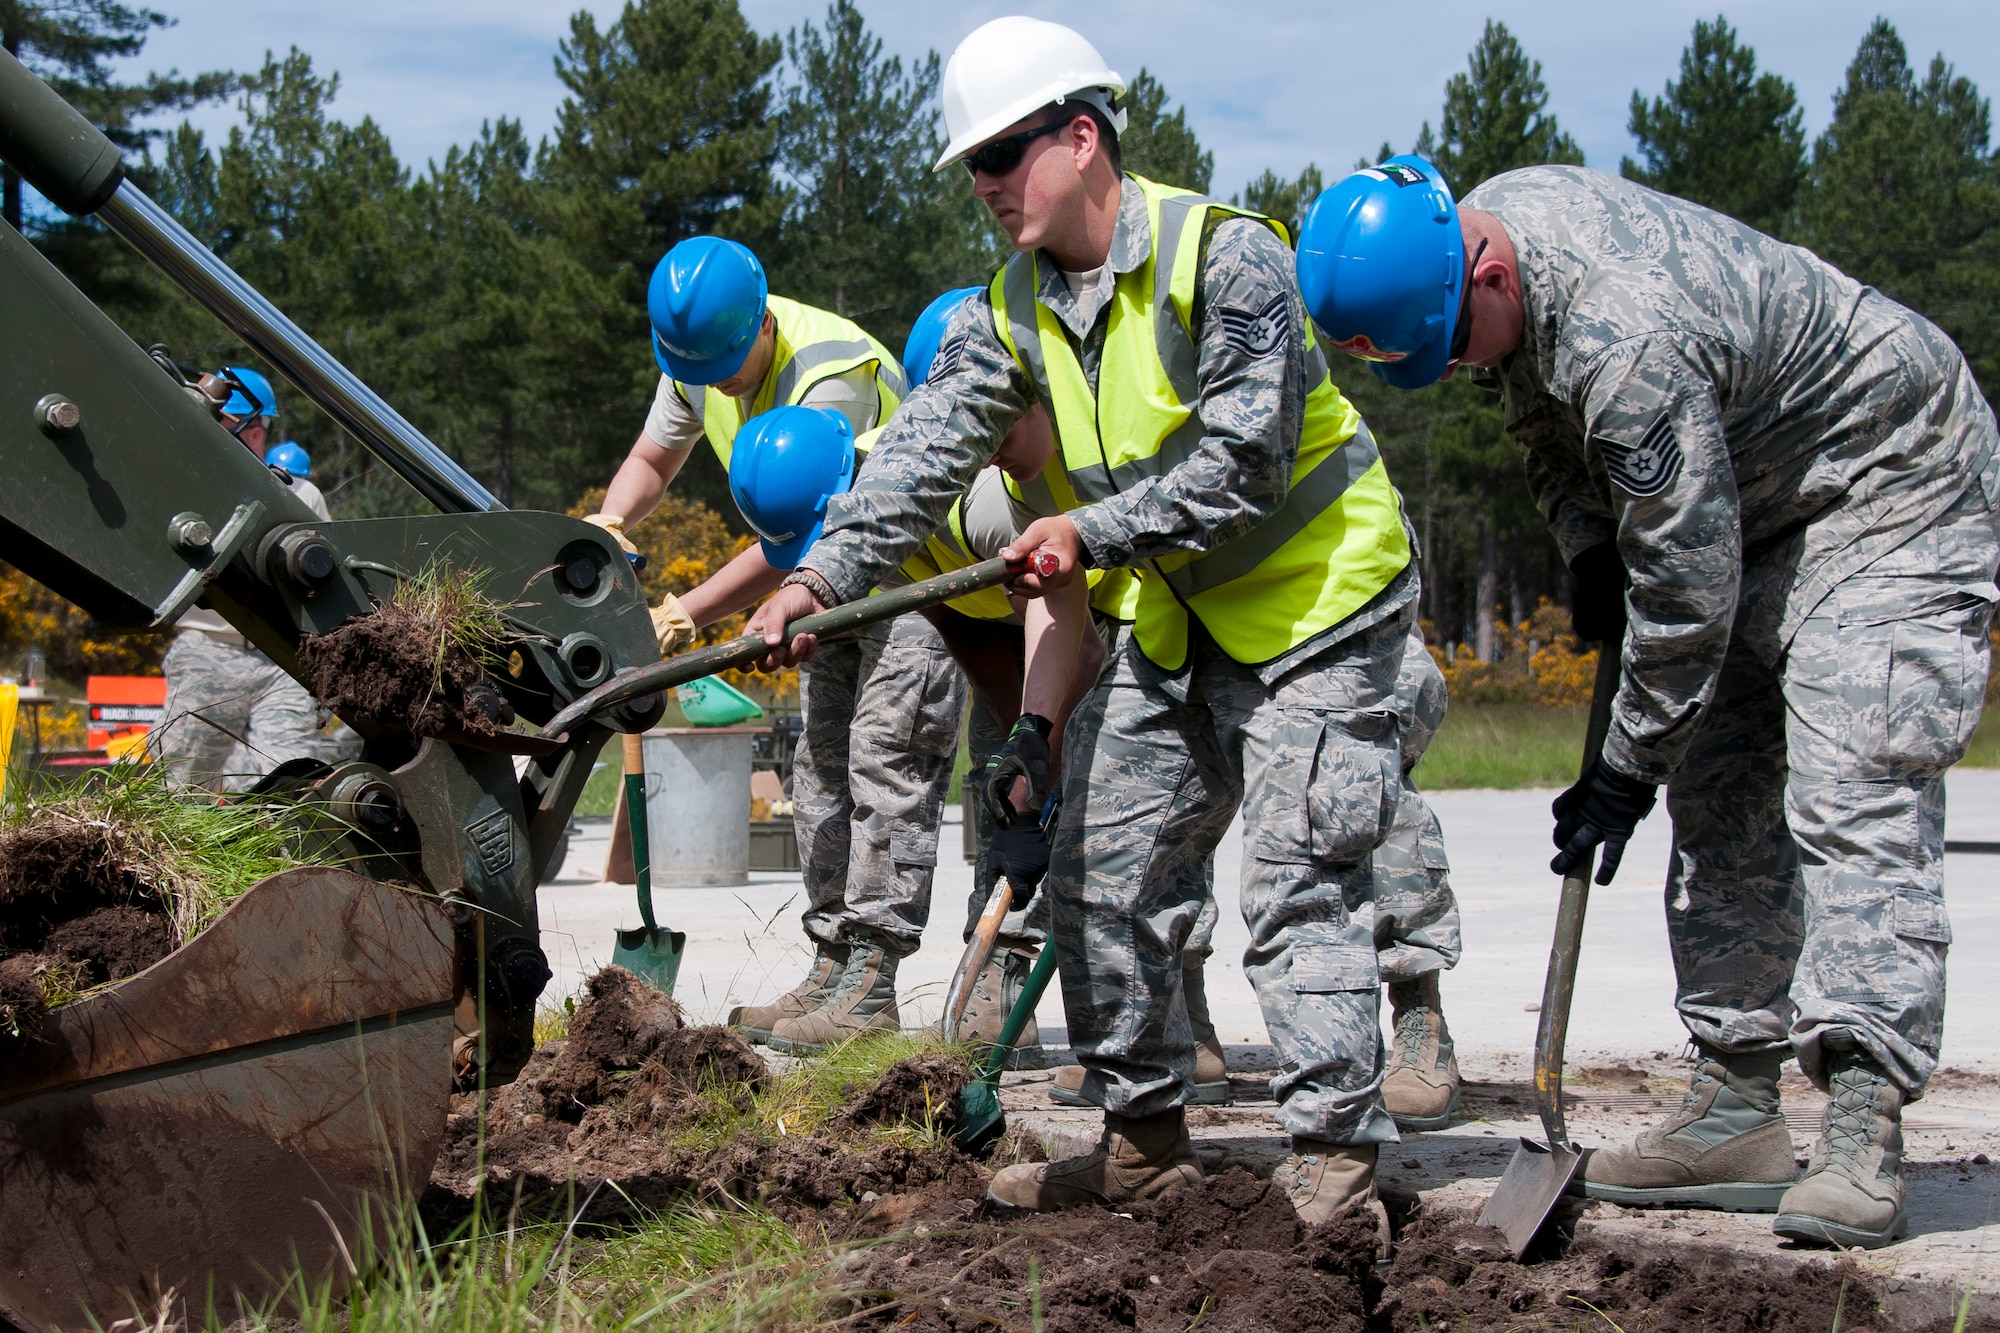 U.S. Air Force Airmen with the Civil Engineering Squadron of 128th Air Refueling Wing, excavate dirt at a construction site June 10, 2015, at Kinloss Barracks in Morayshire, Scotland, United Kingdom, in support of Exercise Flying Rose. The construction site was being prepared as the foundation for a troop shelter set to be used by the British Army for Kinloss Barracks’ air support training. The 128 ARW CE Airmen were participating in Exercise Flying Rose, an exchange exercise between the U.S. Air National Guard and British Army where forces deploy to one another’s countries and work to complete construction-related tasks. (U.S. Air National Guard photo by Airman 1st Class Morgan R. Lipinski/Released)